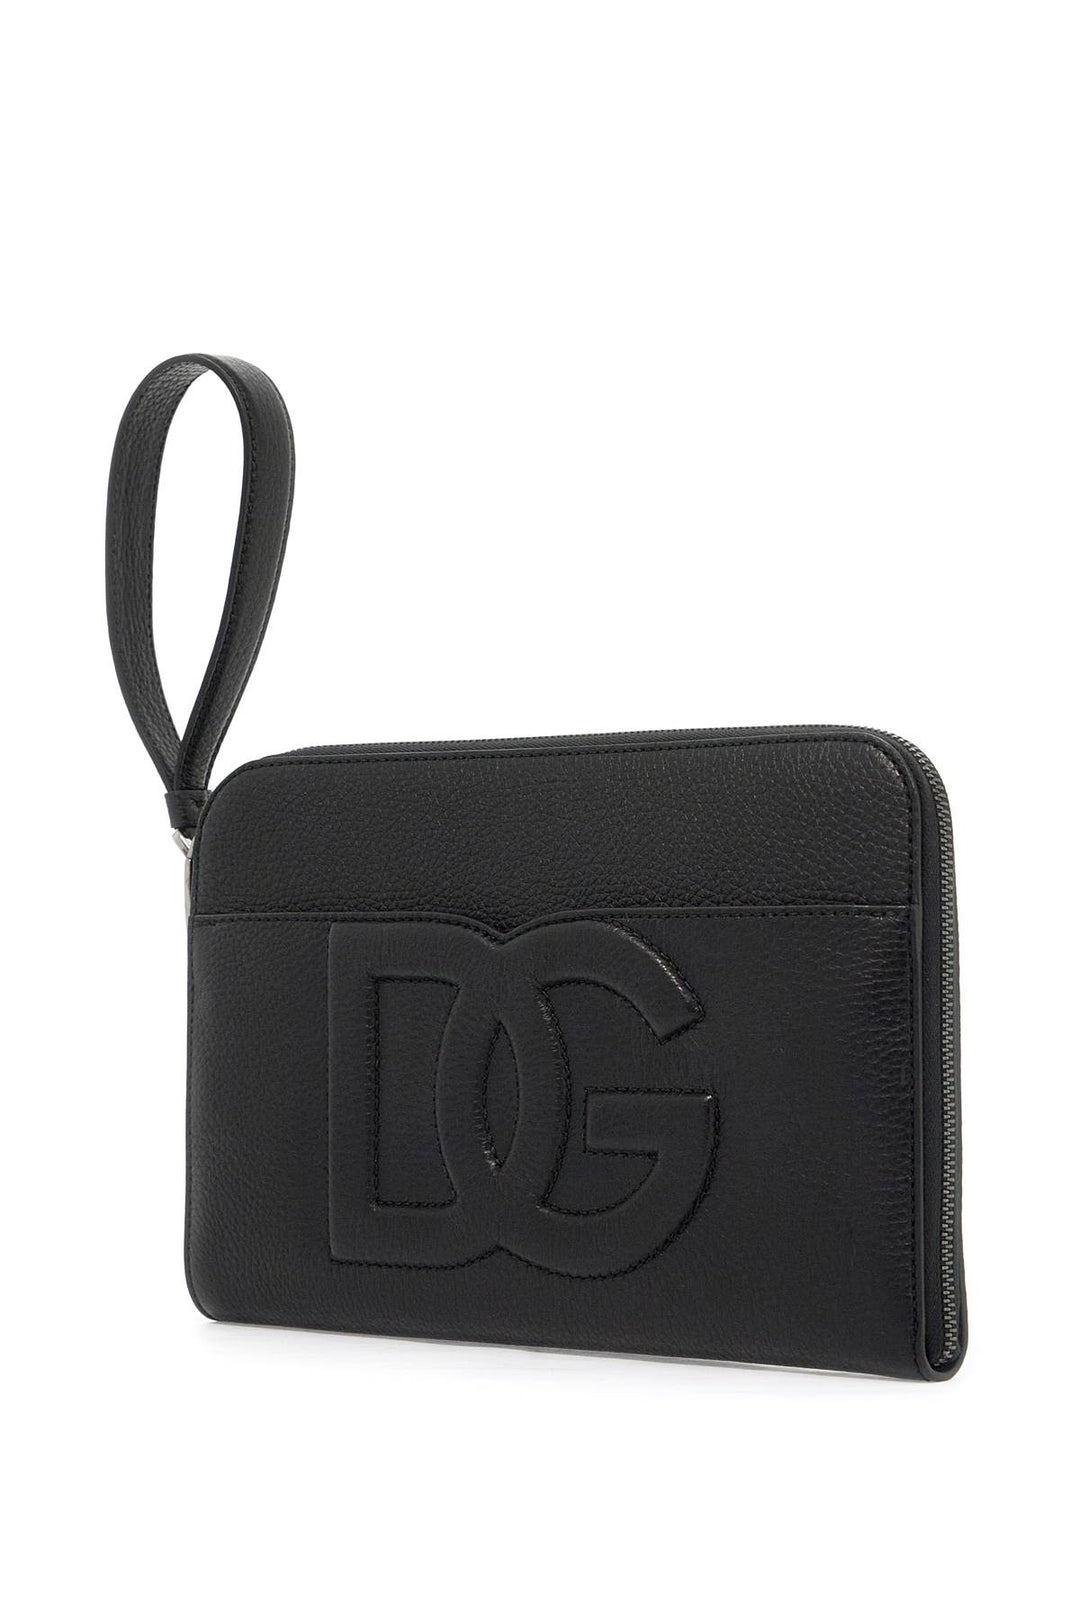 Dolce & Gabbana Replace With Double Quoteembossed Leather Media Pouch   Black